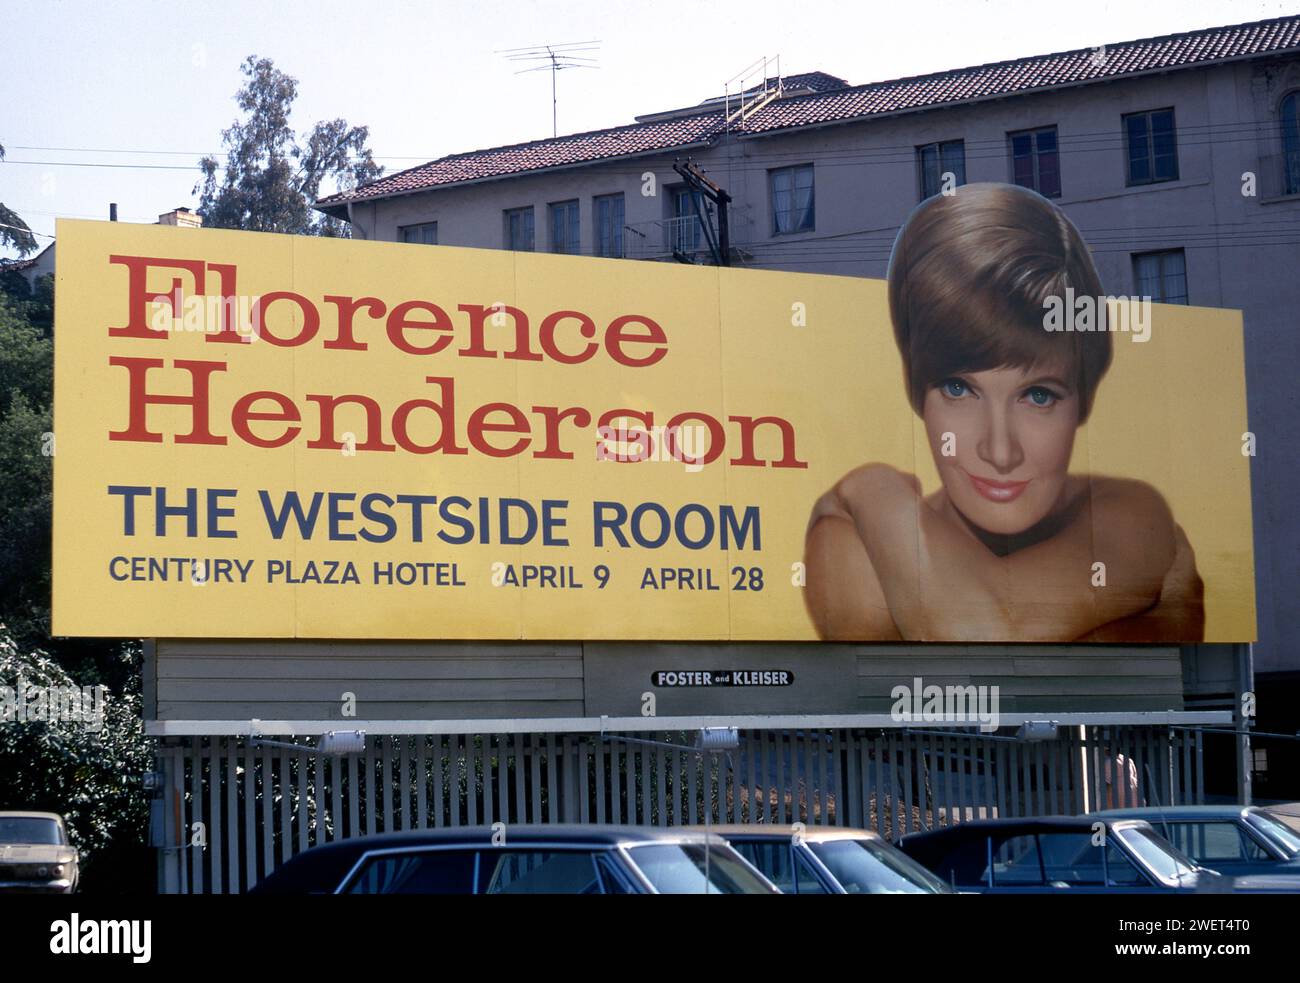 A billboard on the Sunset Strip promotes a live performance by Florence Henderson, later known for her role on The Brady Bunch television show. circa 1970. Los Angeles, California, USA Stock Photo